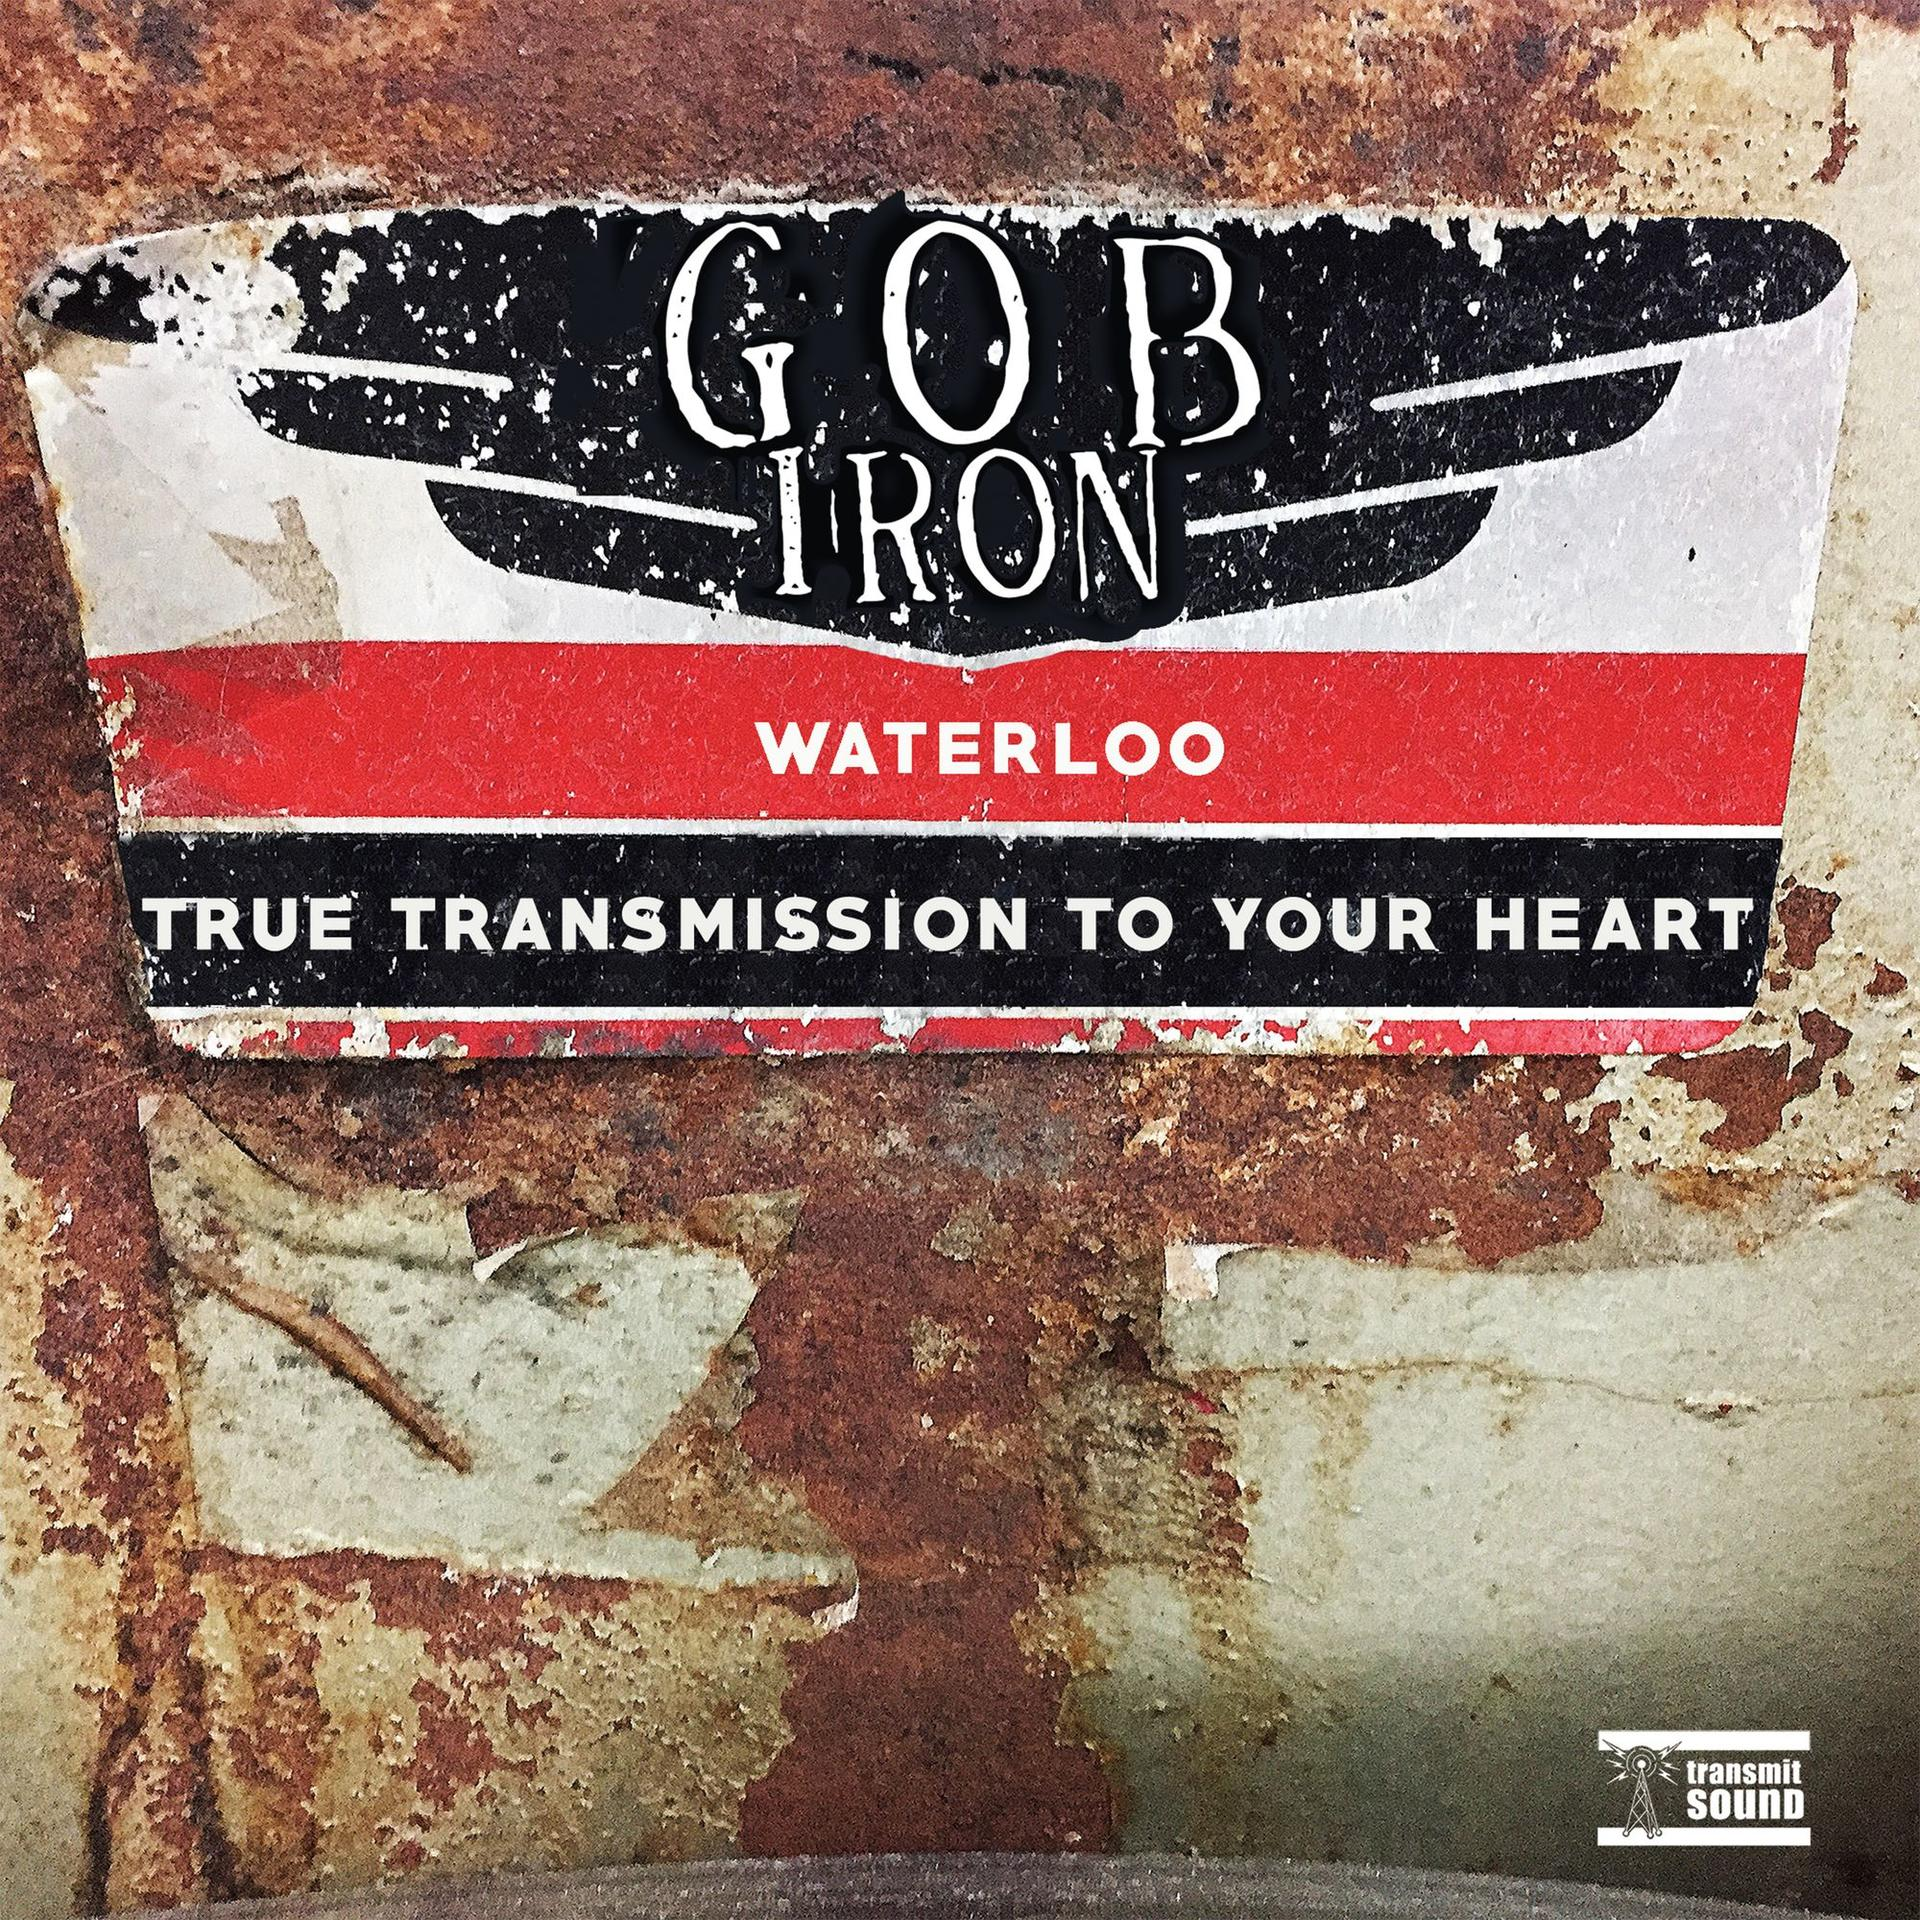 Gob Iron - 7-WATERLOO/TRUE TRANSMISSION - TO HEART (Vinyl) YOUR